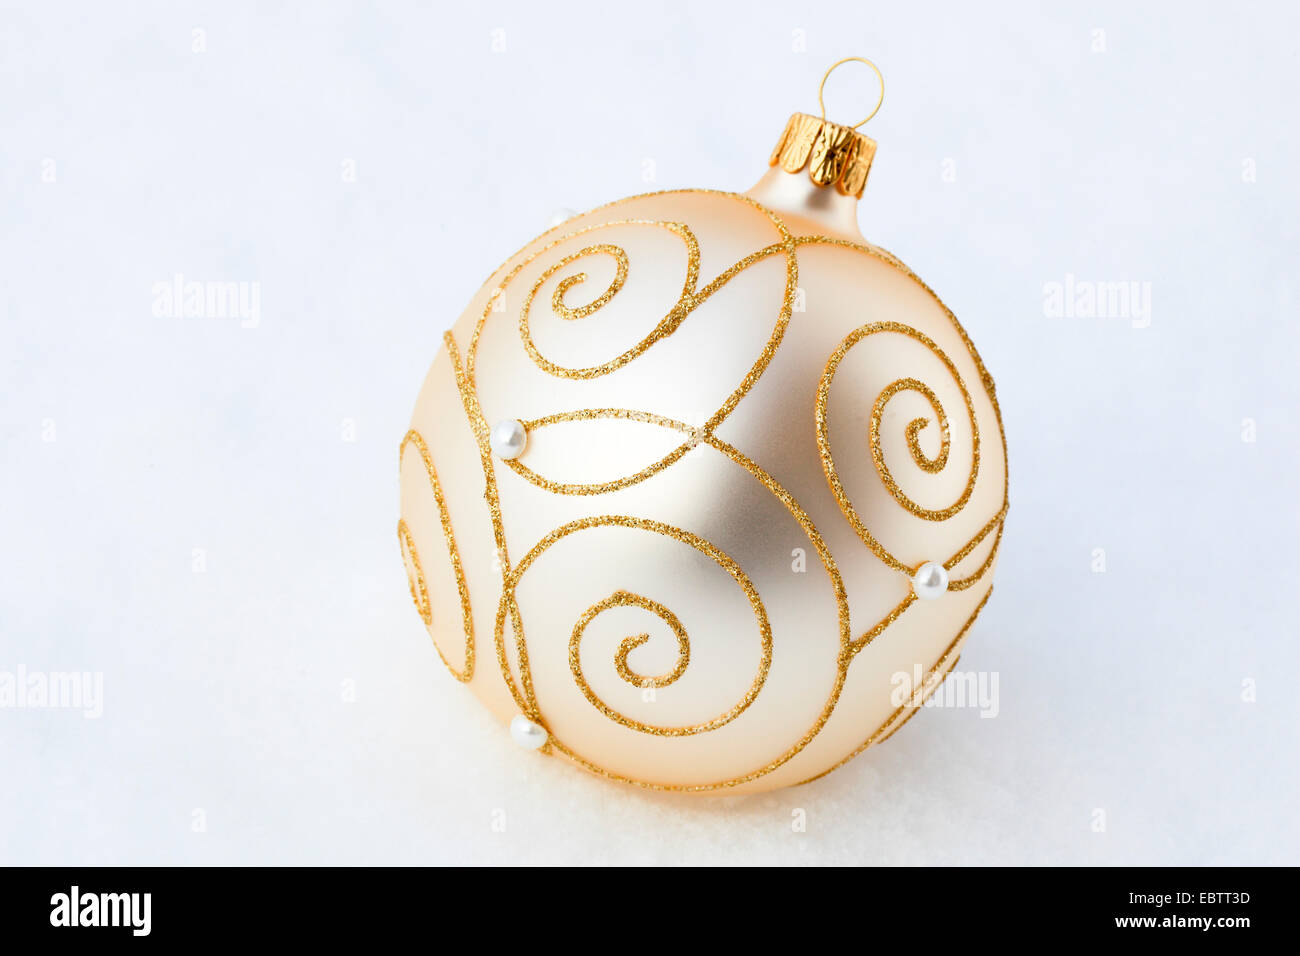 christmas tree balls with golden ornaments Stock Photo